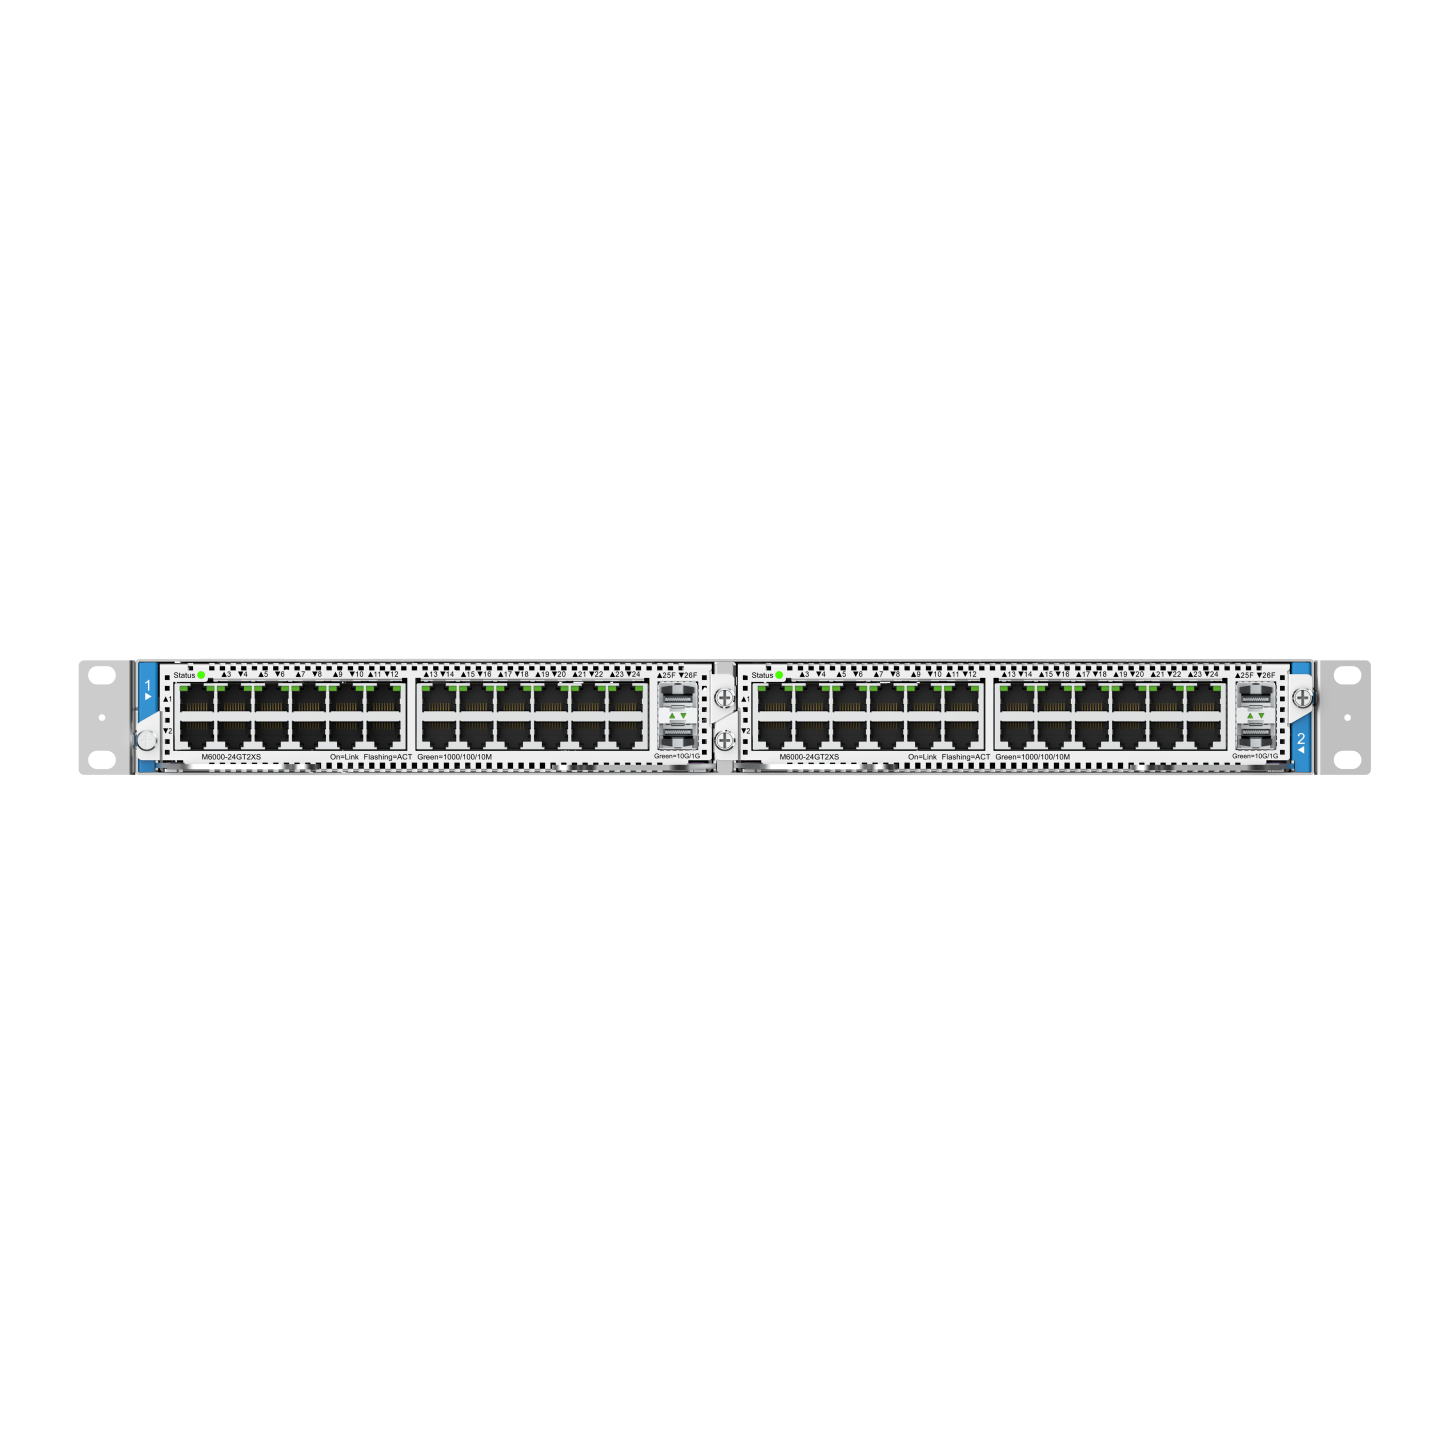 RG-NBS6002 Layer 3 Cloud Managed Switch